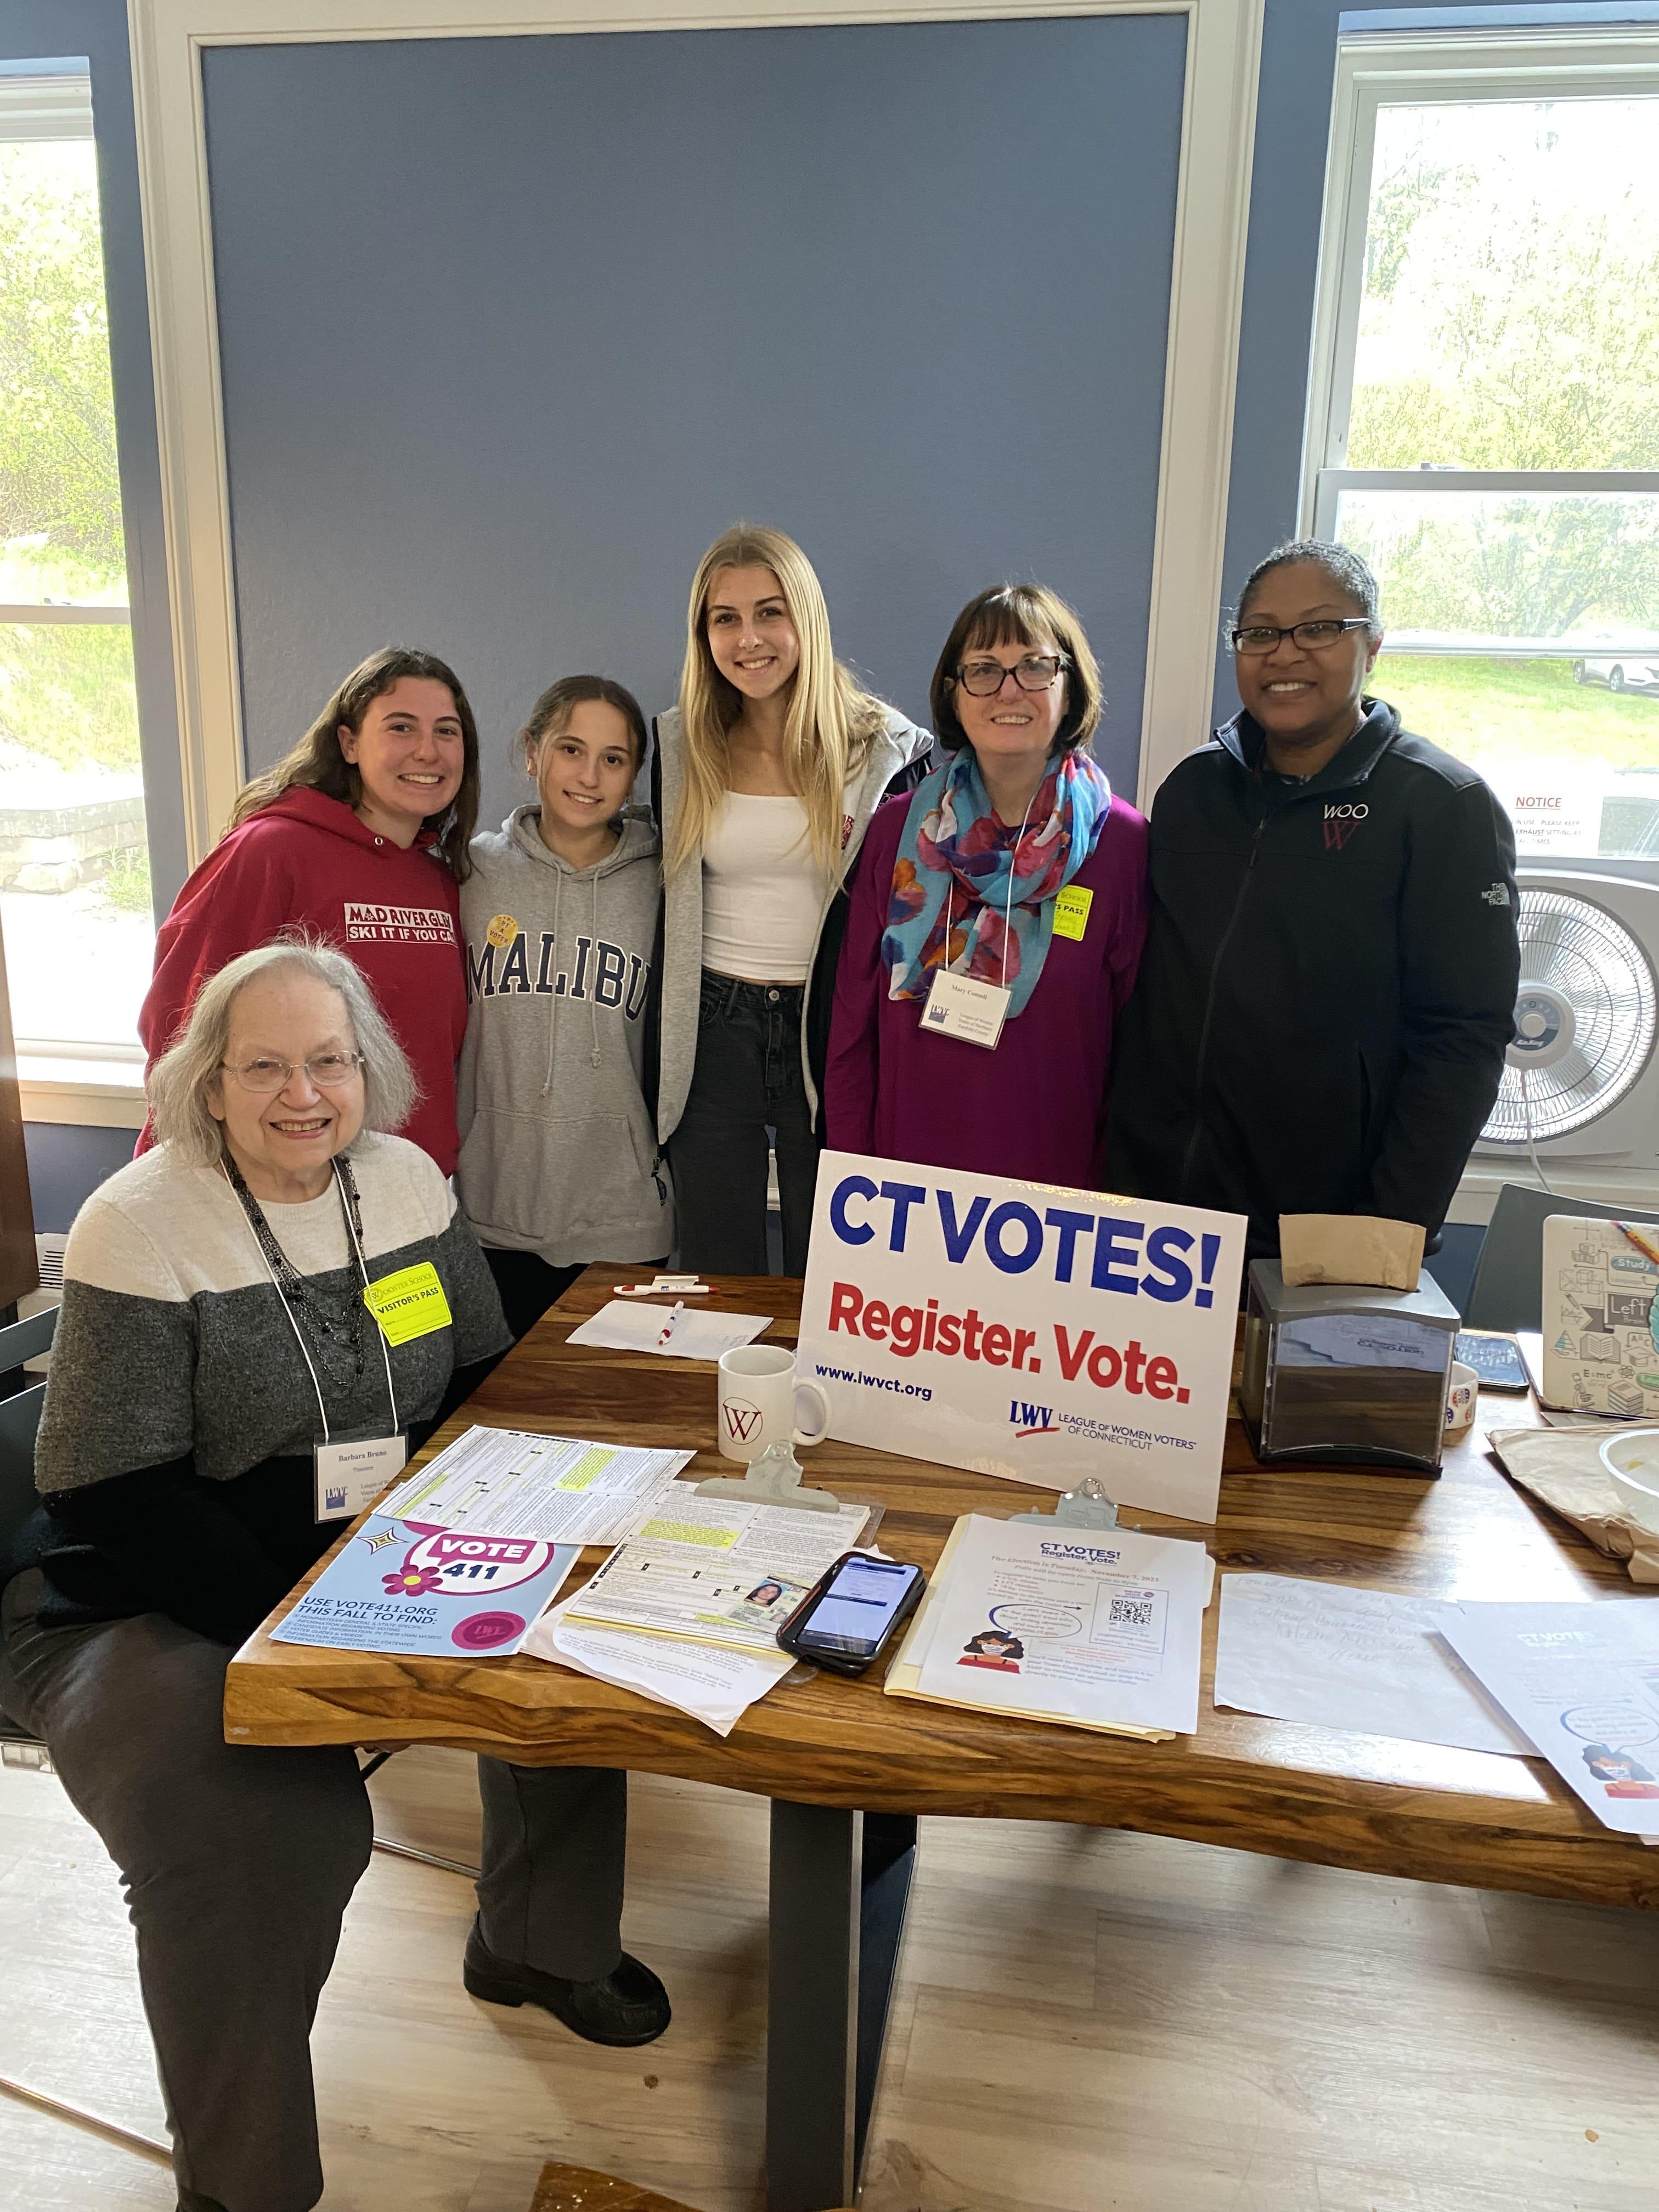 3 members of LWVNFC registering 3 students from Wooster School to vote.